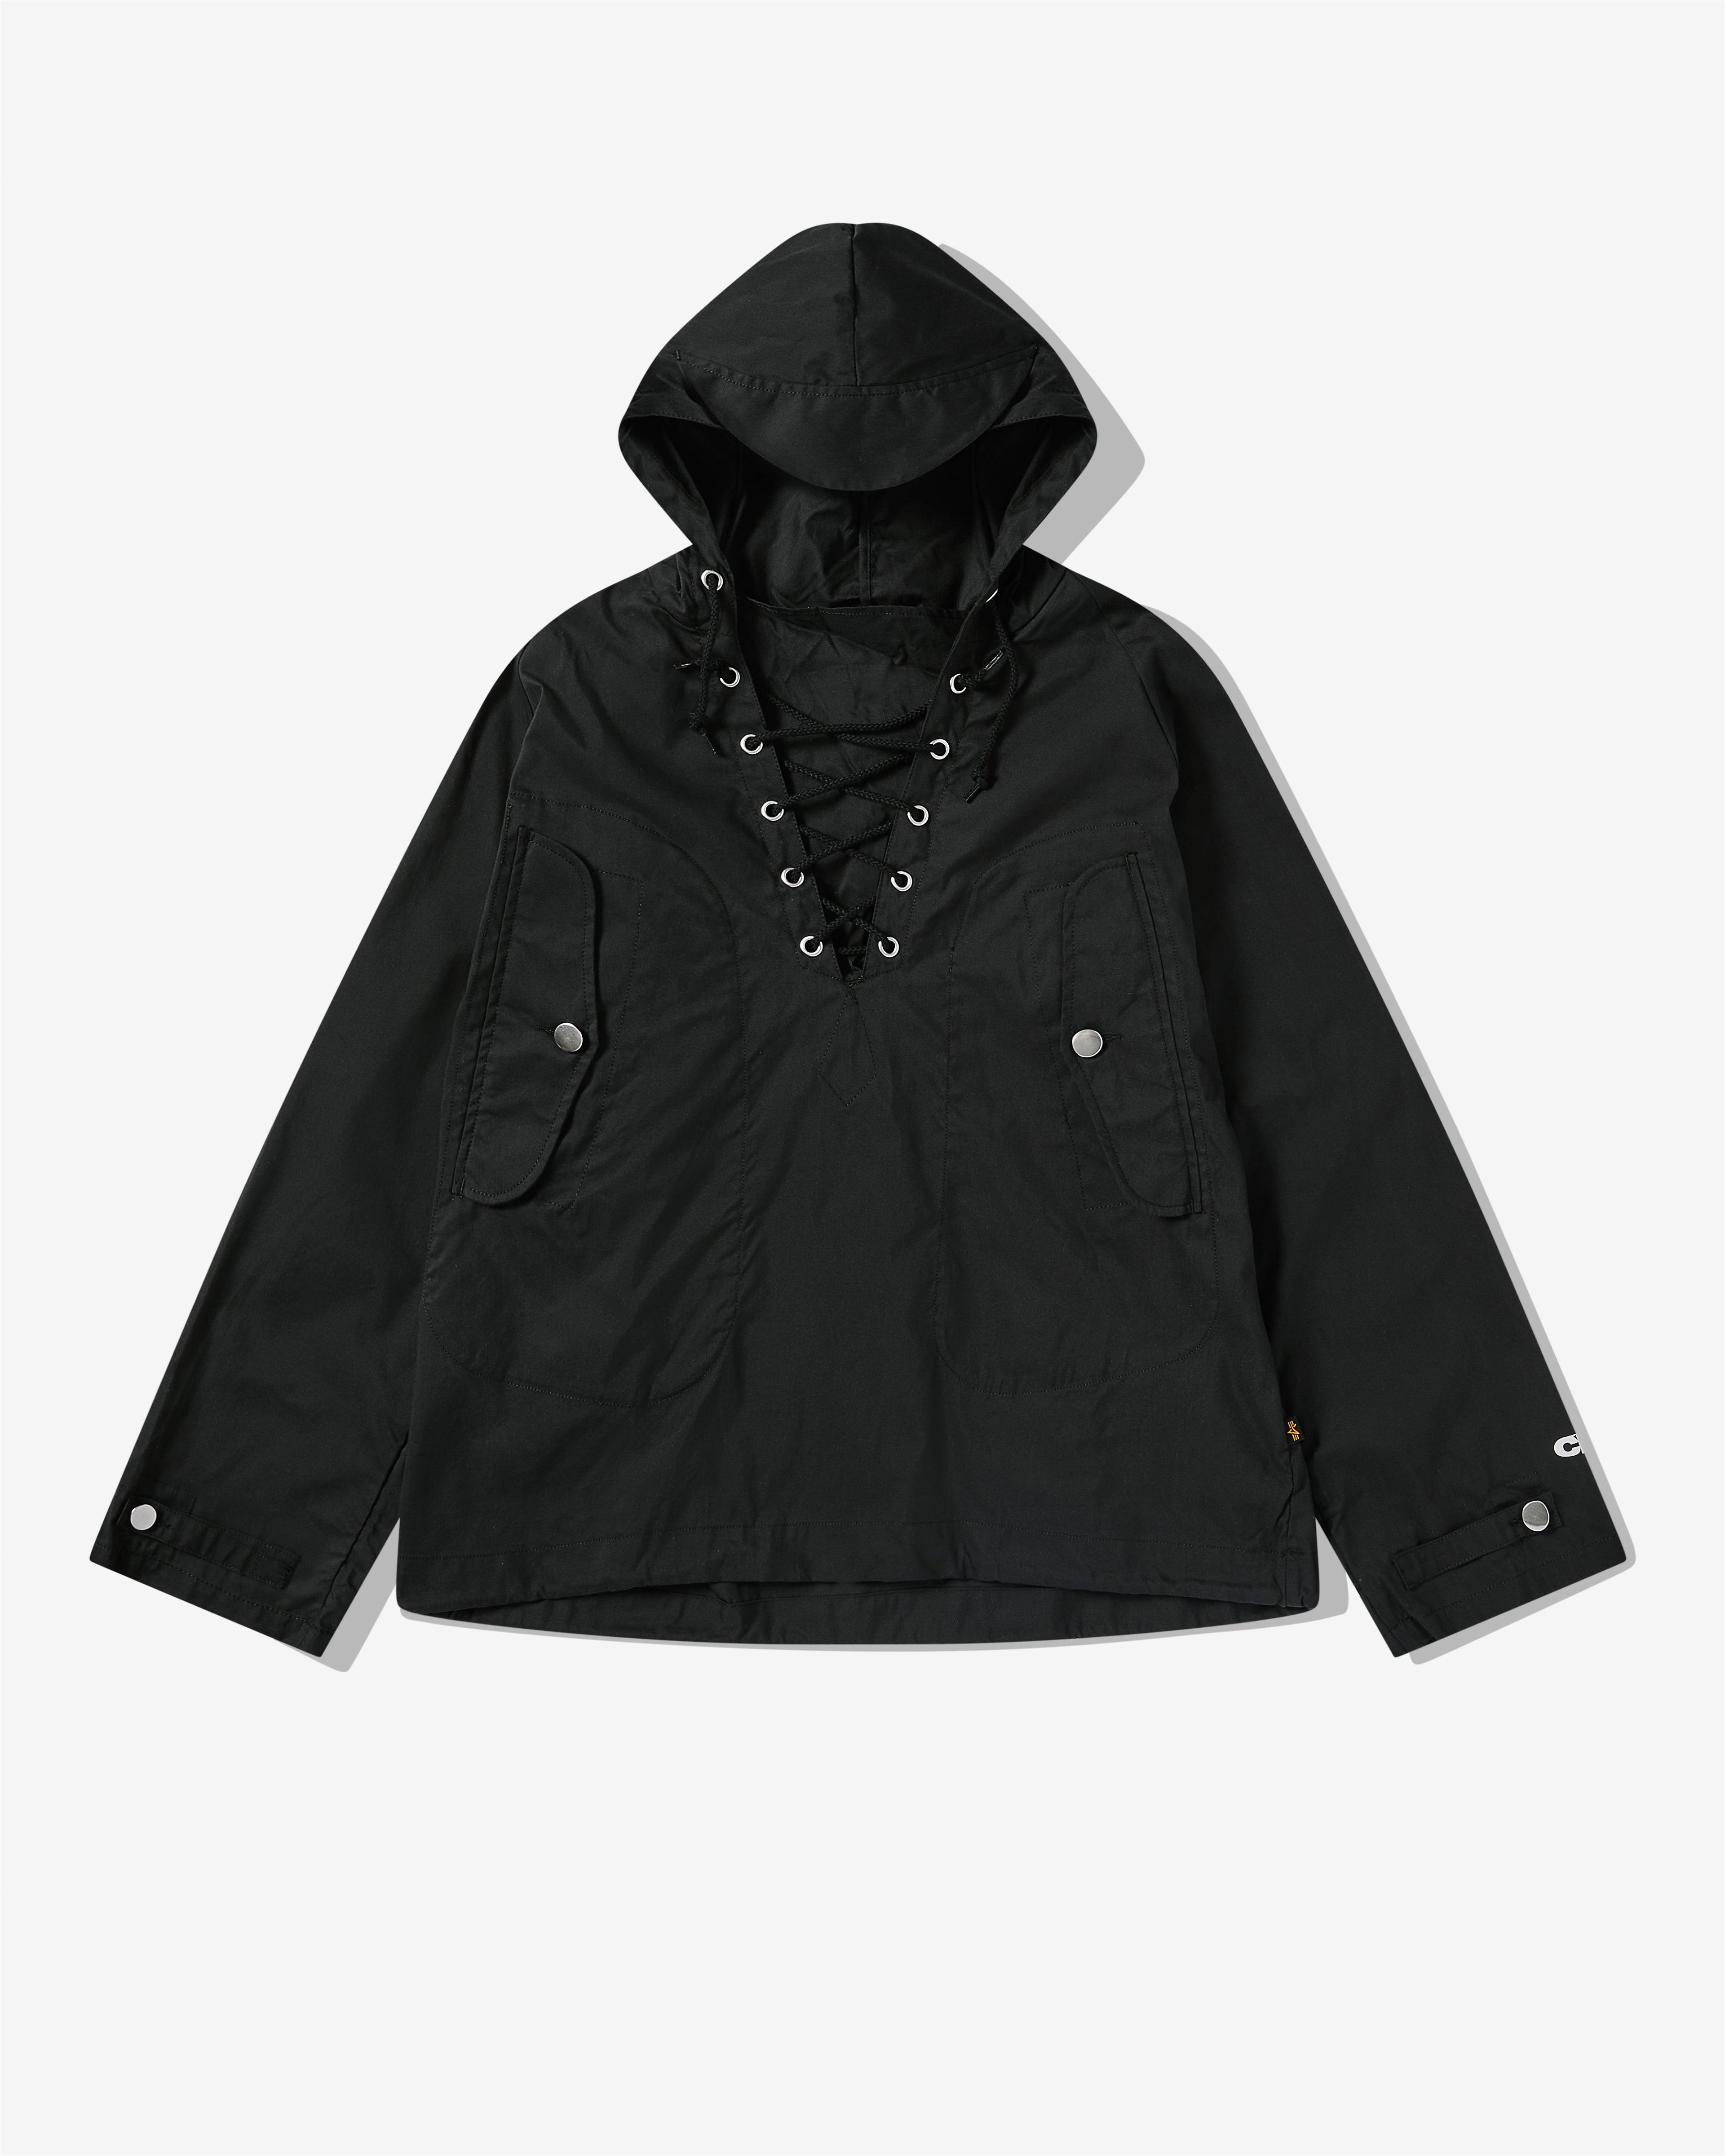 CDG - Alpha Industries Anorak - (Black) by COMME DES GARCONS